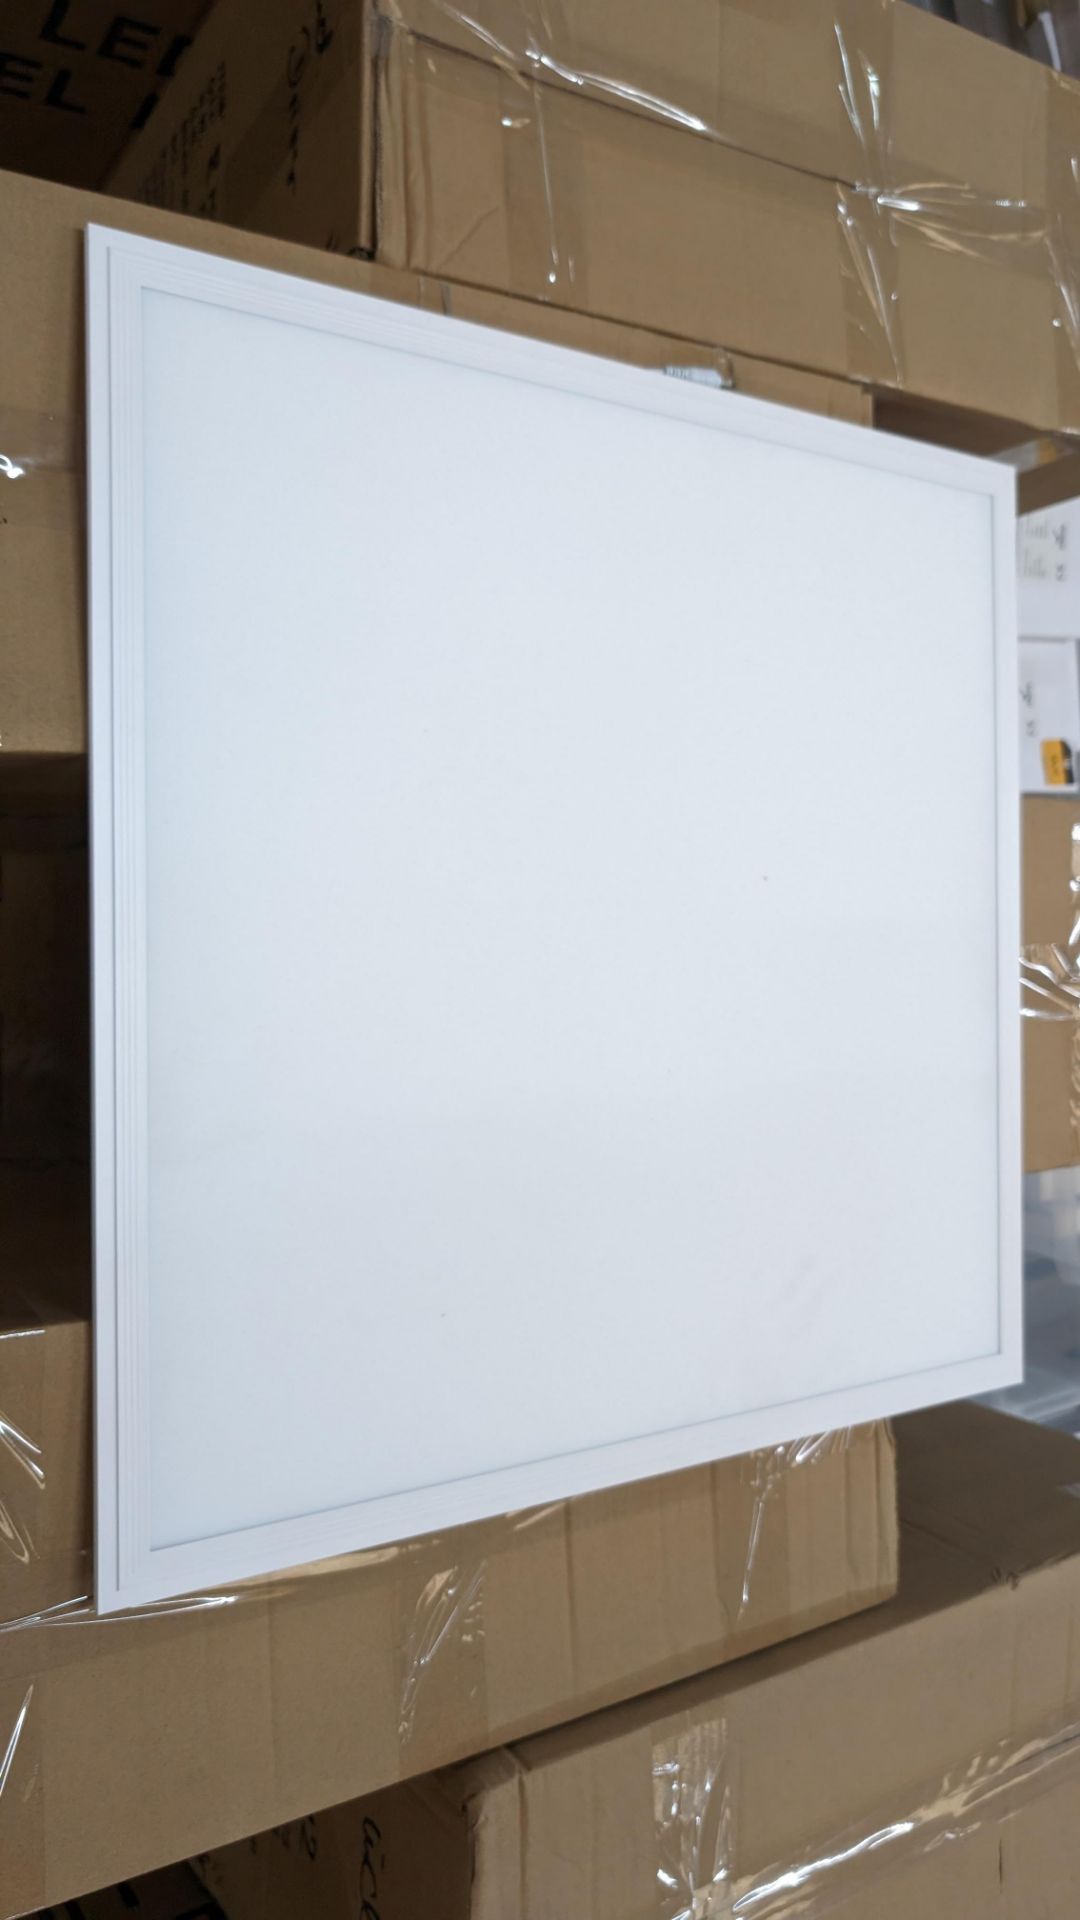 60 off 595mm x 595mm 4000k 45w LED lighting panel, each including driver. This lot comprises 5 cart - Image 5 of 7